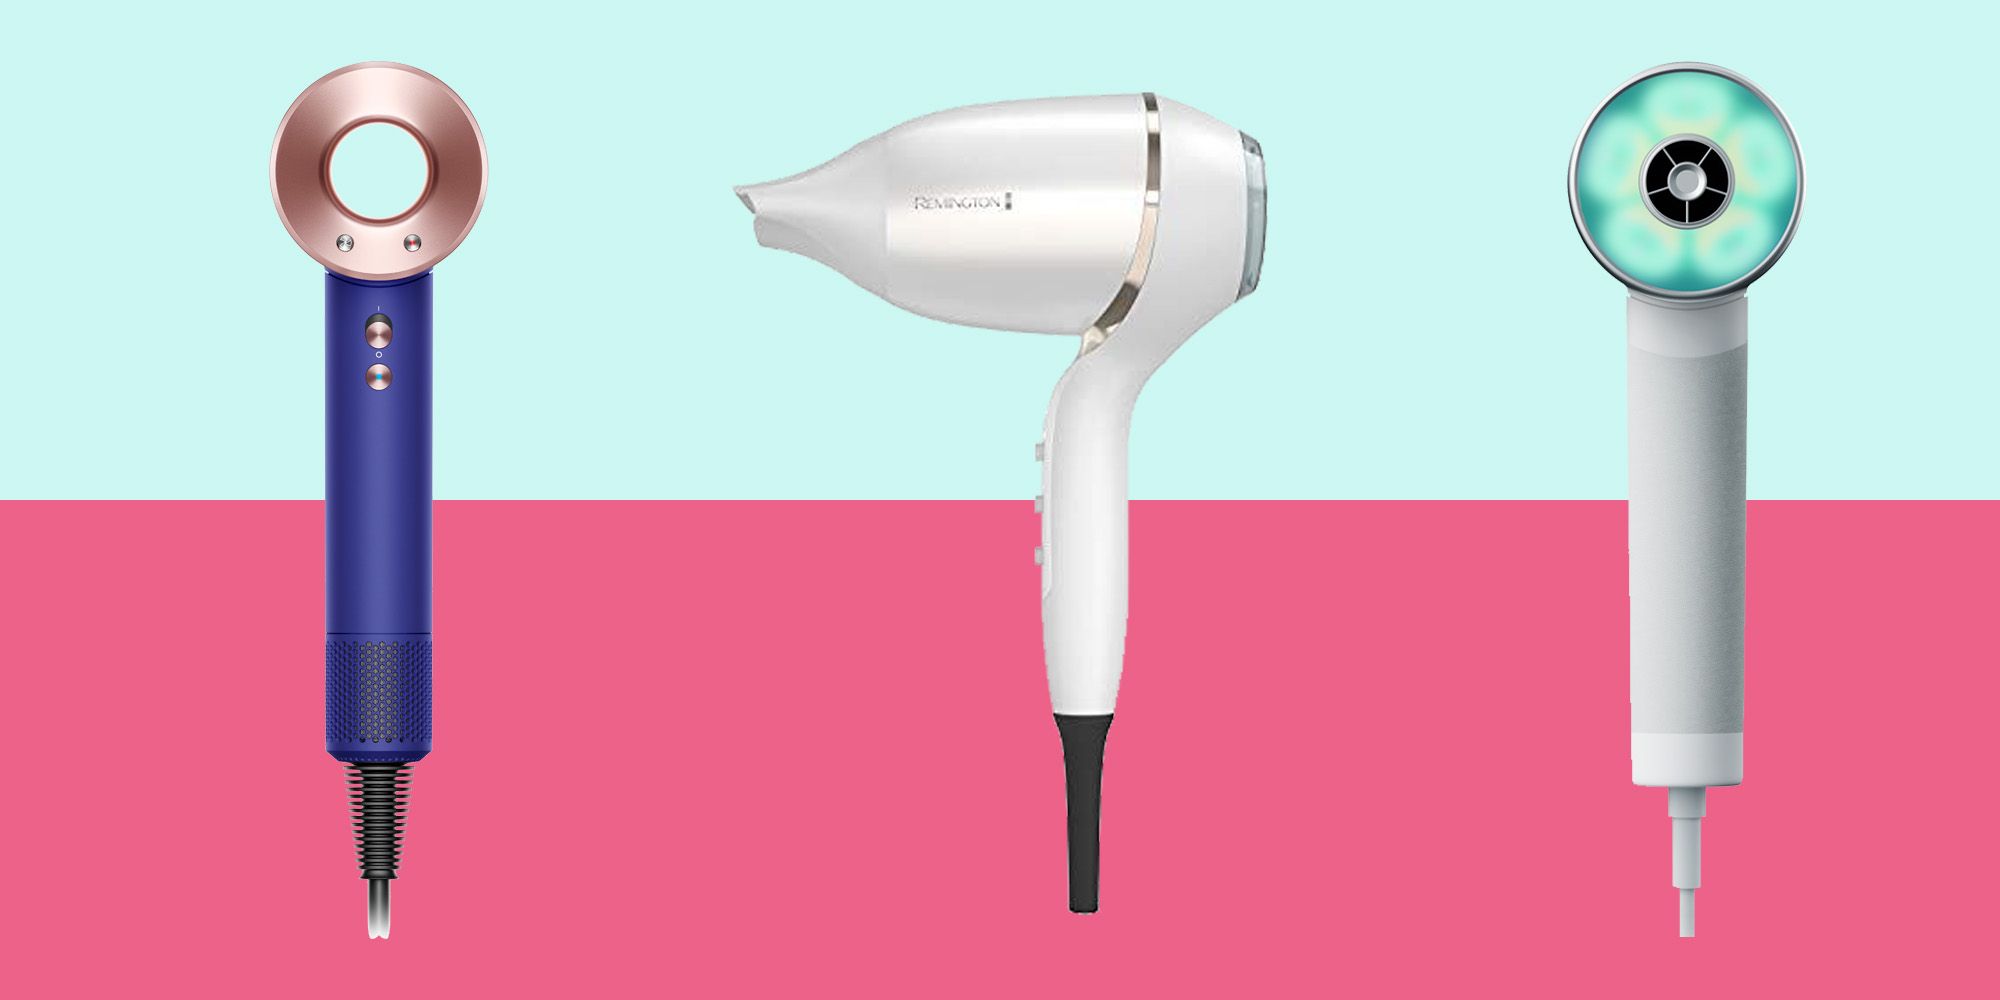 Hairitage Comin' In Hot Hair Dryer |1875 Watts Ionic Hair Dryer for Frizz  Control & Shine | Powerful Blow Dryer for All Hair Types - Walmart.com